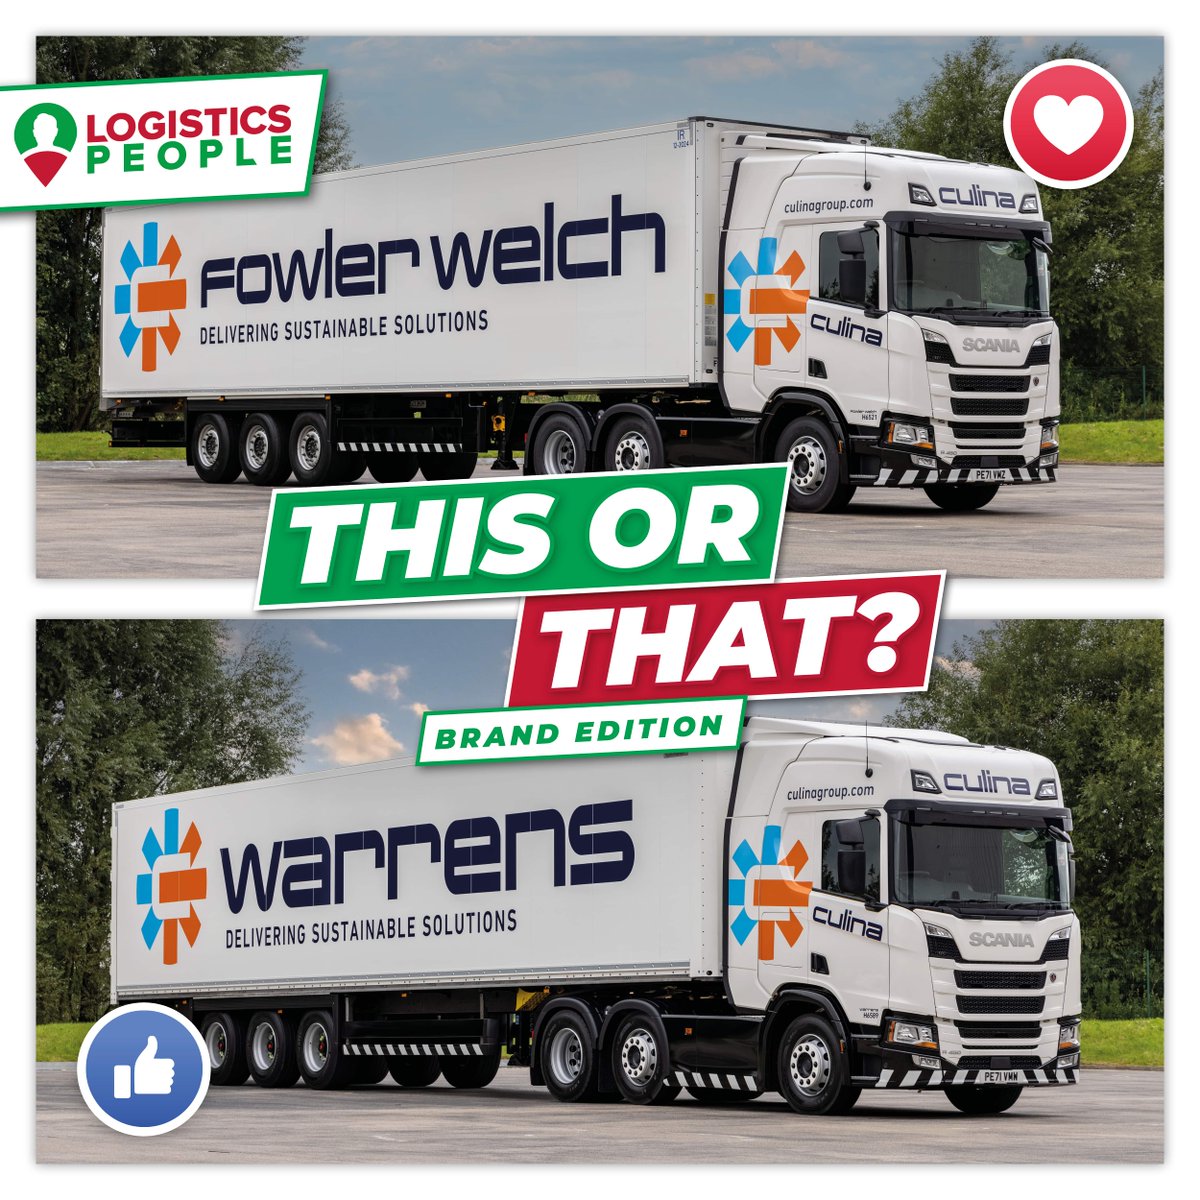 THIS OR THAT: BRAND EDITION 🤩 

Which truck do you prefer? Vote to share your answer! 🤩

#TeamLP #LogisticsPeople #Agency #Trucks #HGV #HGVDriver #ThisOrThat #Culina #Stobart